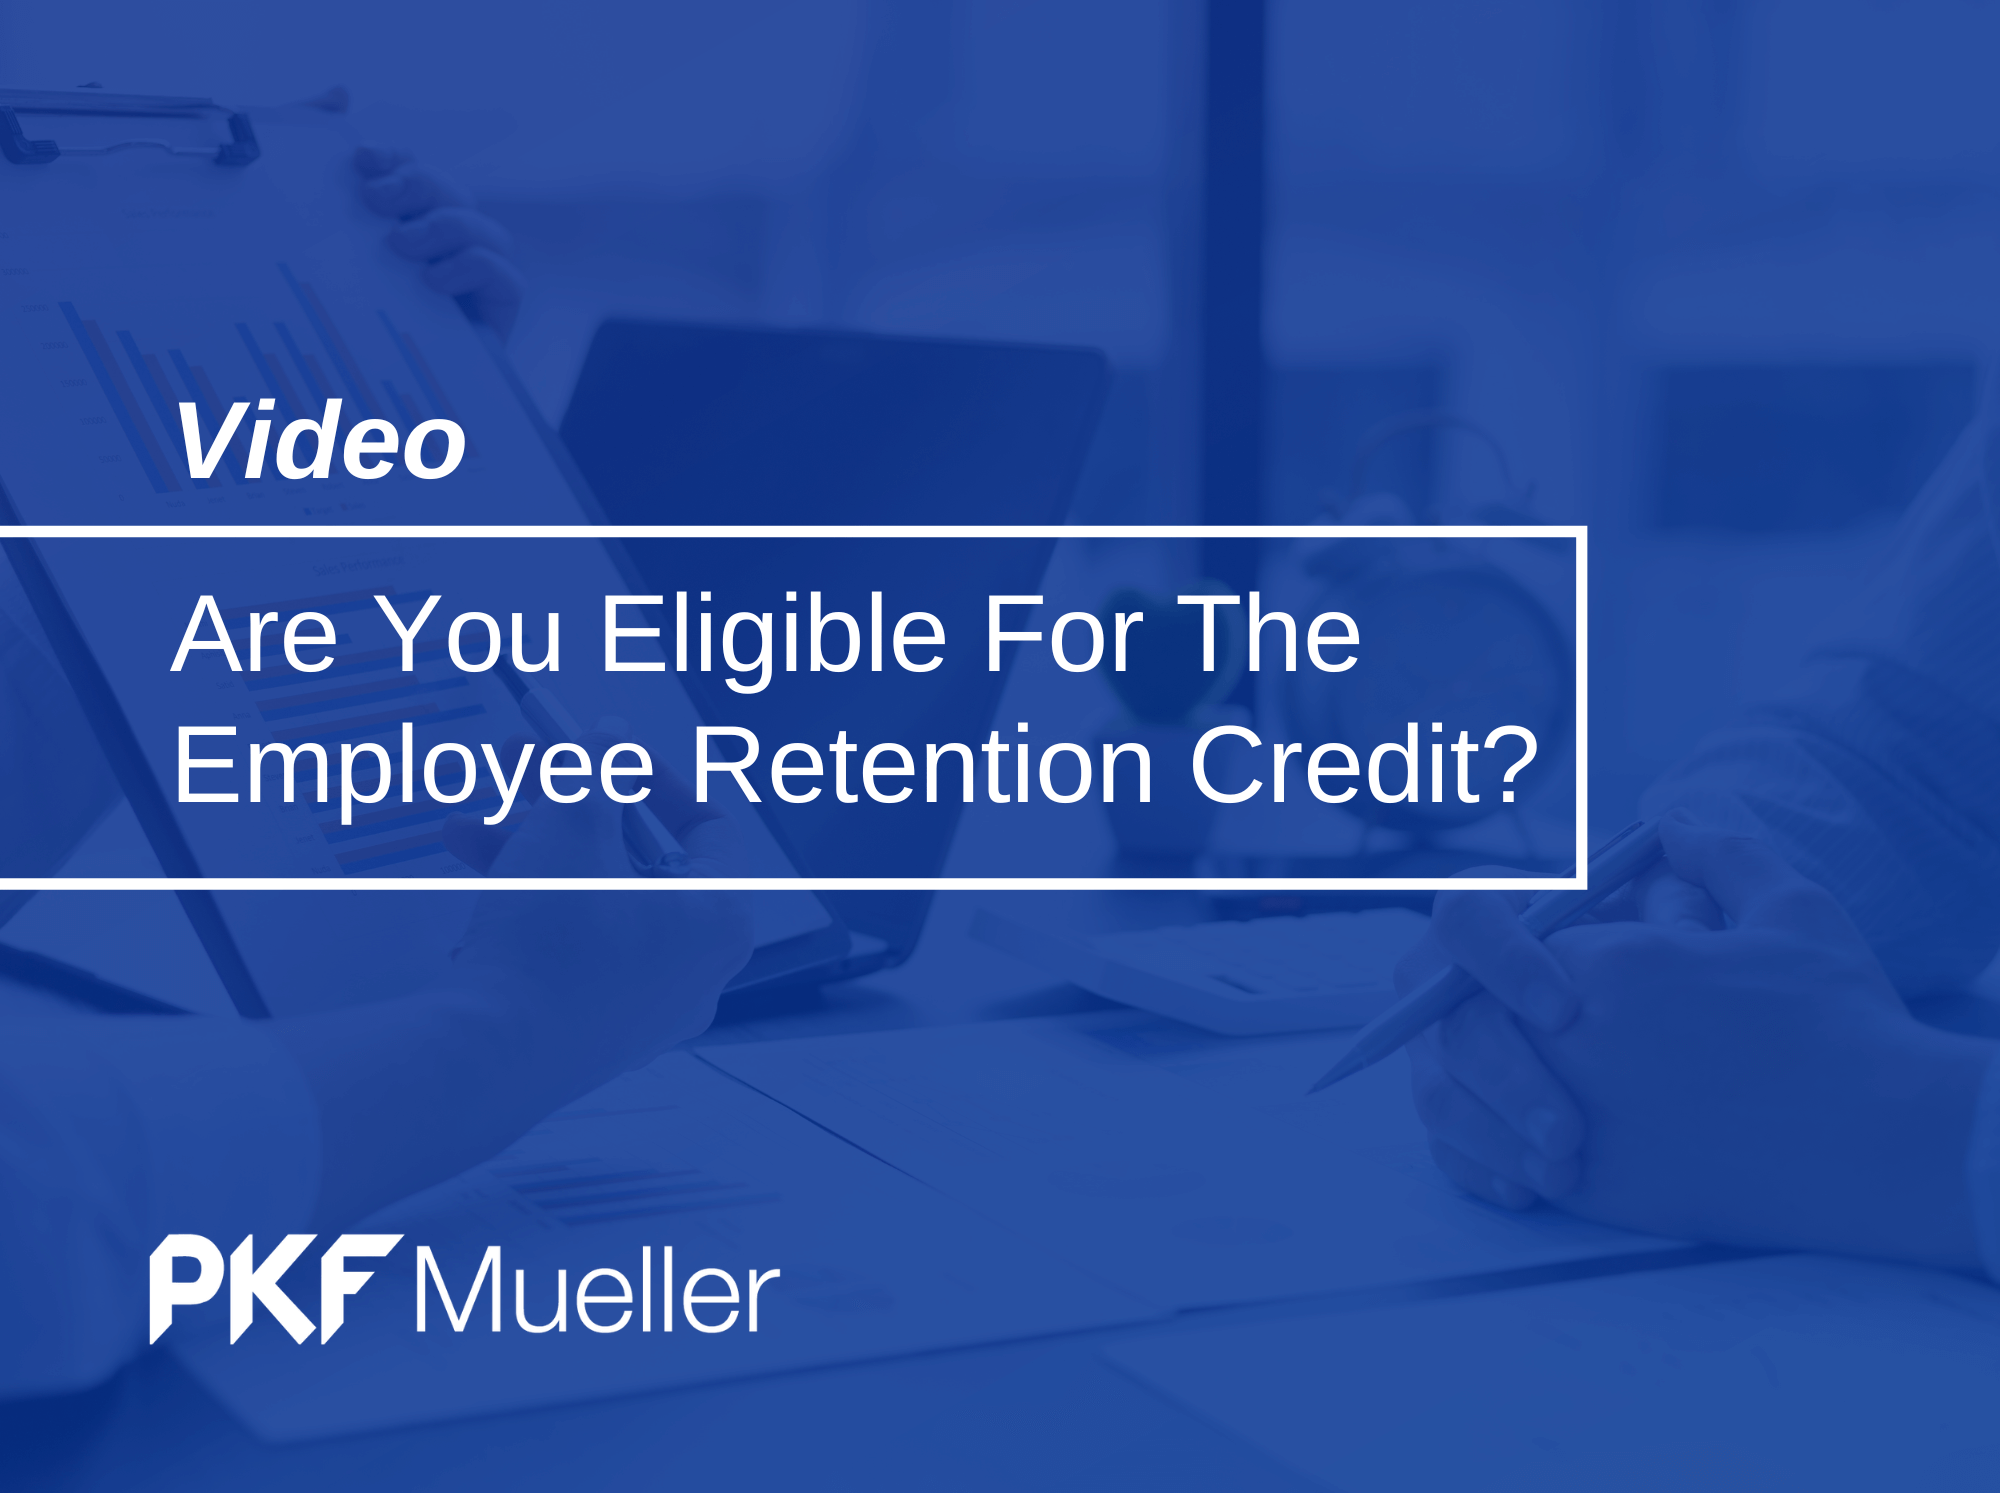 Are you Eligible for the Employee Retention Credit? Video